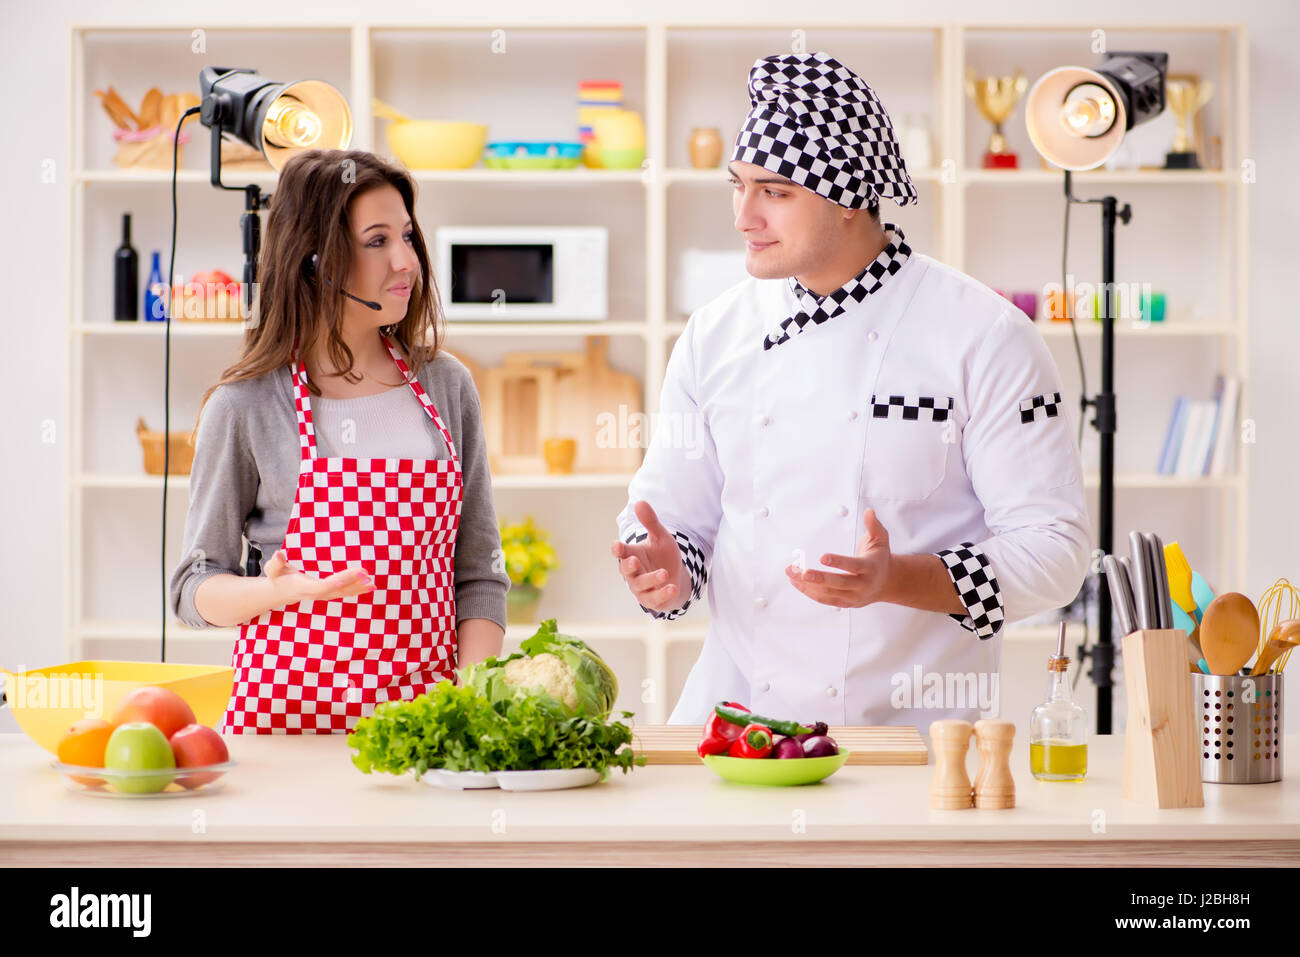 Food Cooking Tv Show In The Studio Stock Photo Alamy